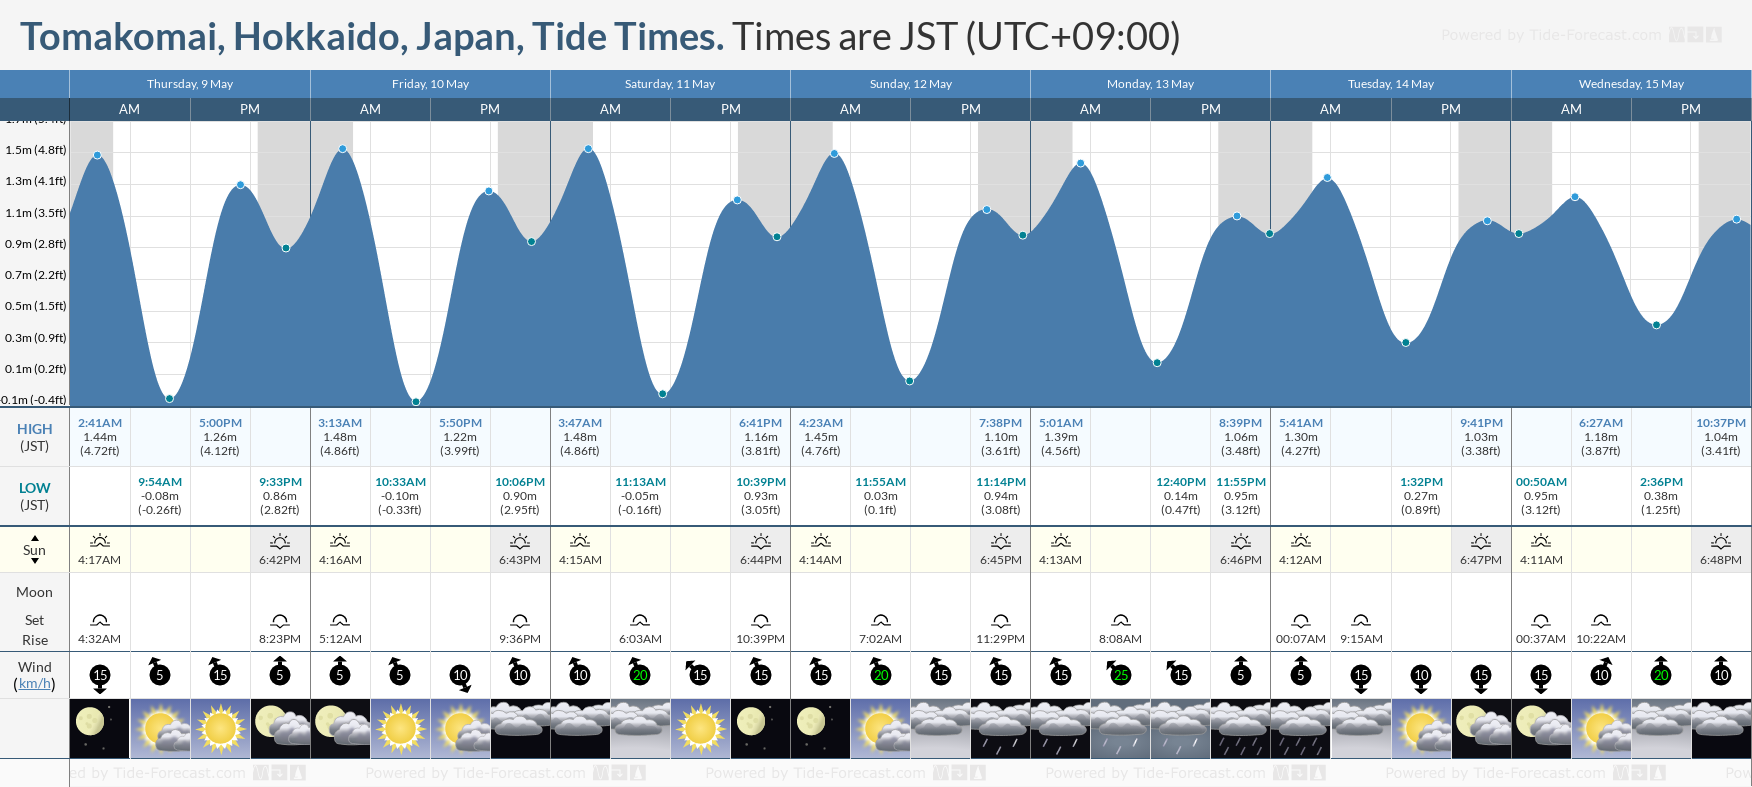 Tomakomai, Hokkaido, Japan Tide Chart including high and low tide tide times for the next 7 days